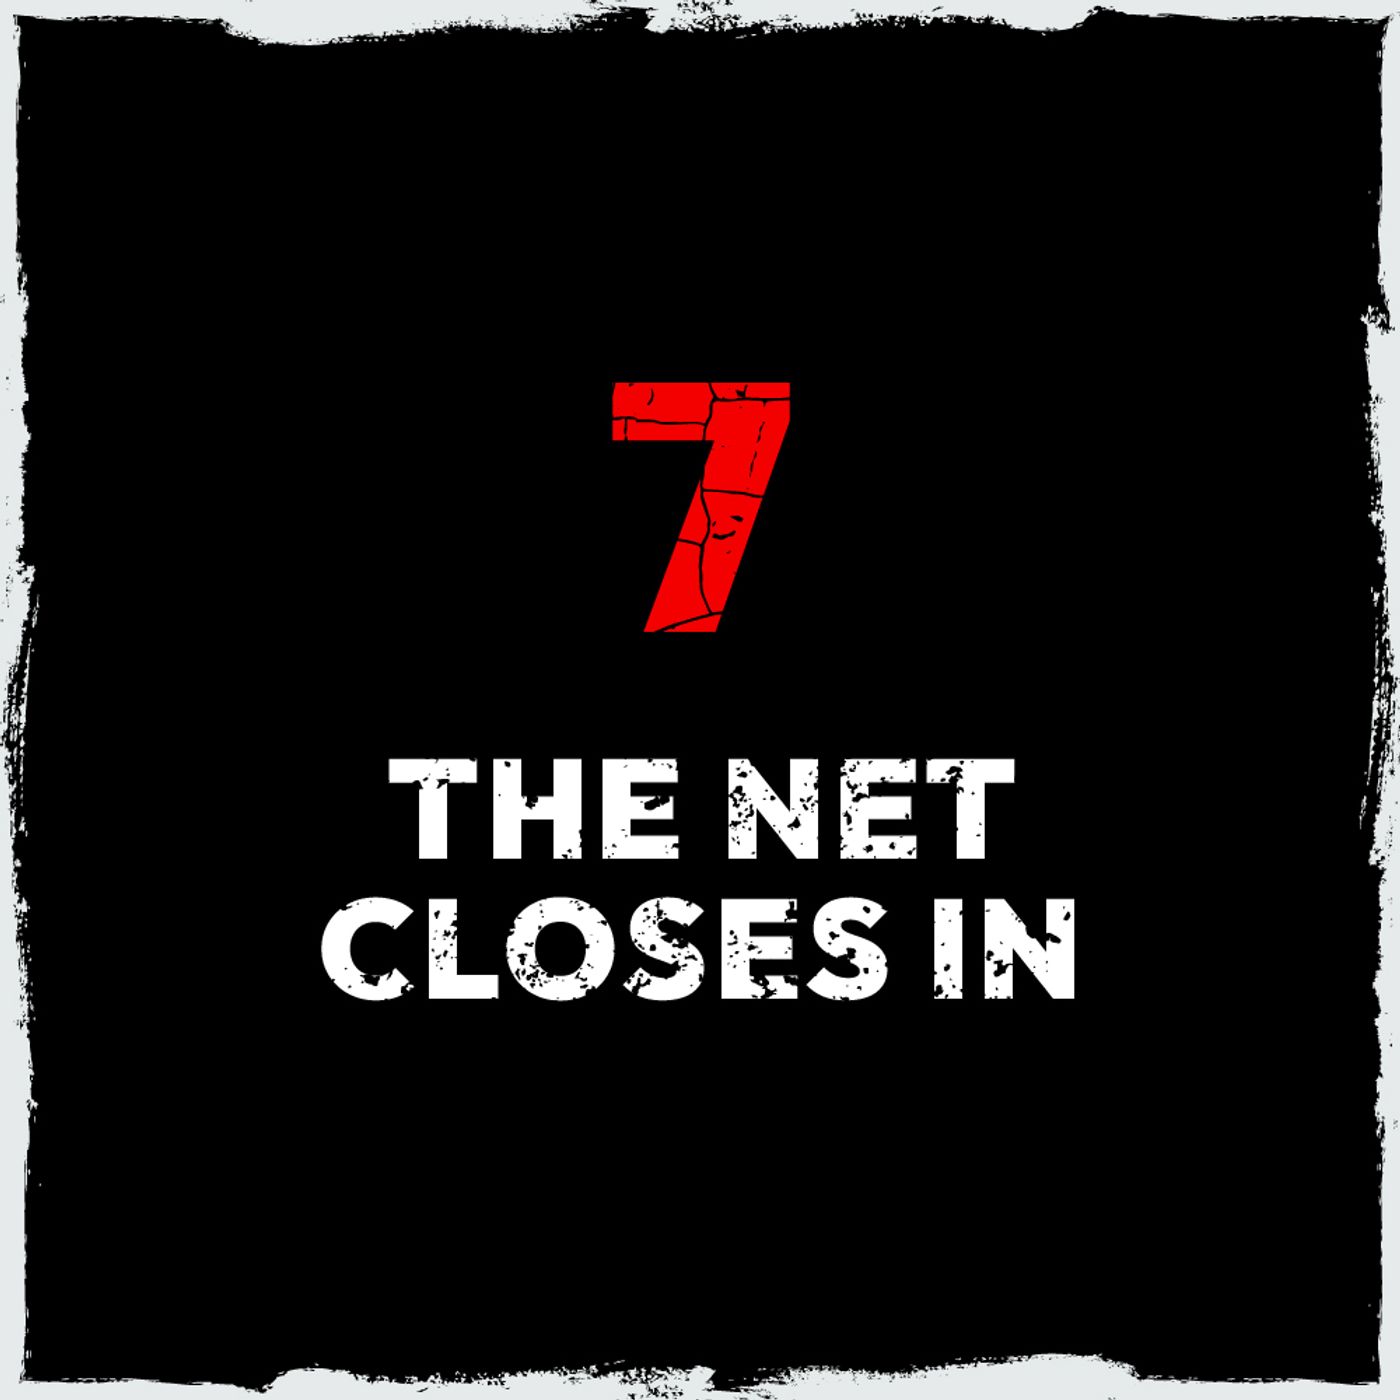 7: Episode 7: The net closes in